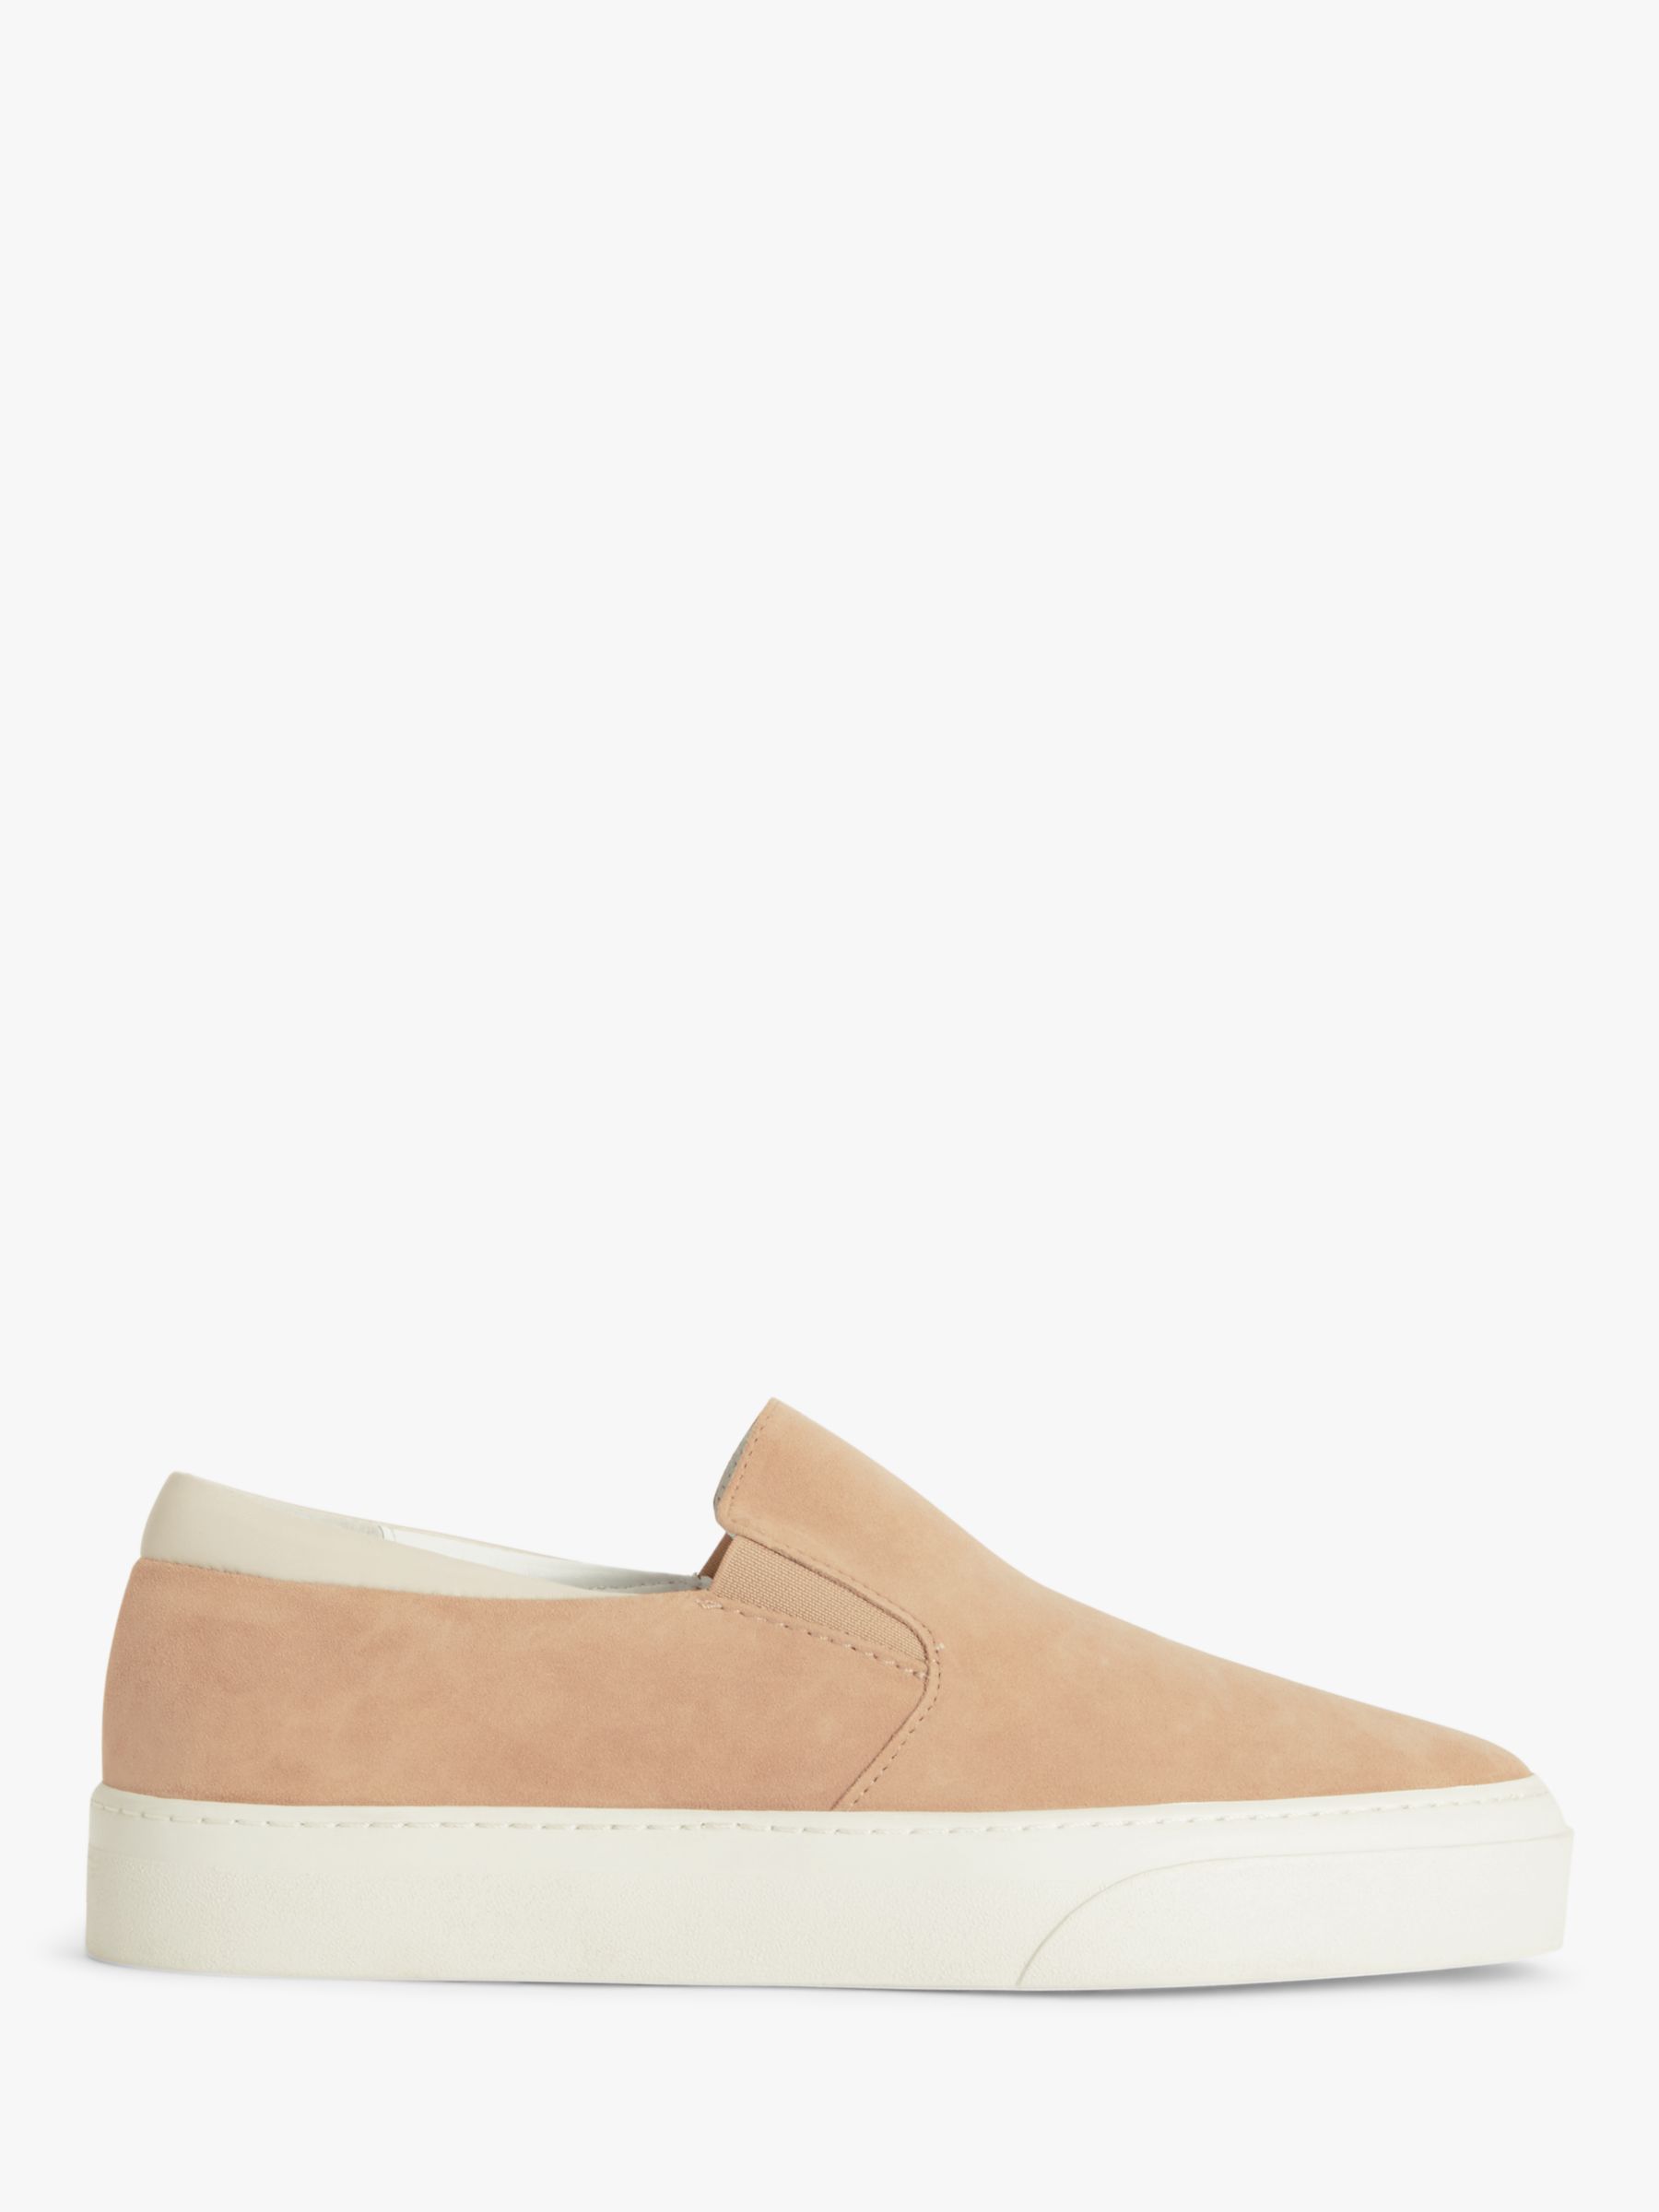 Kin Eli Suede Slip On Trainers, Taupe at John Lewis & Partners